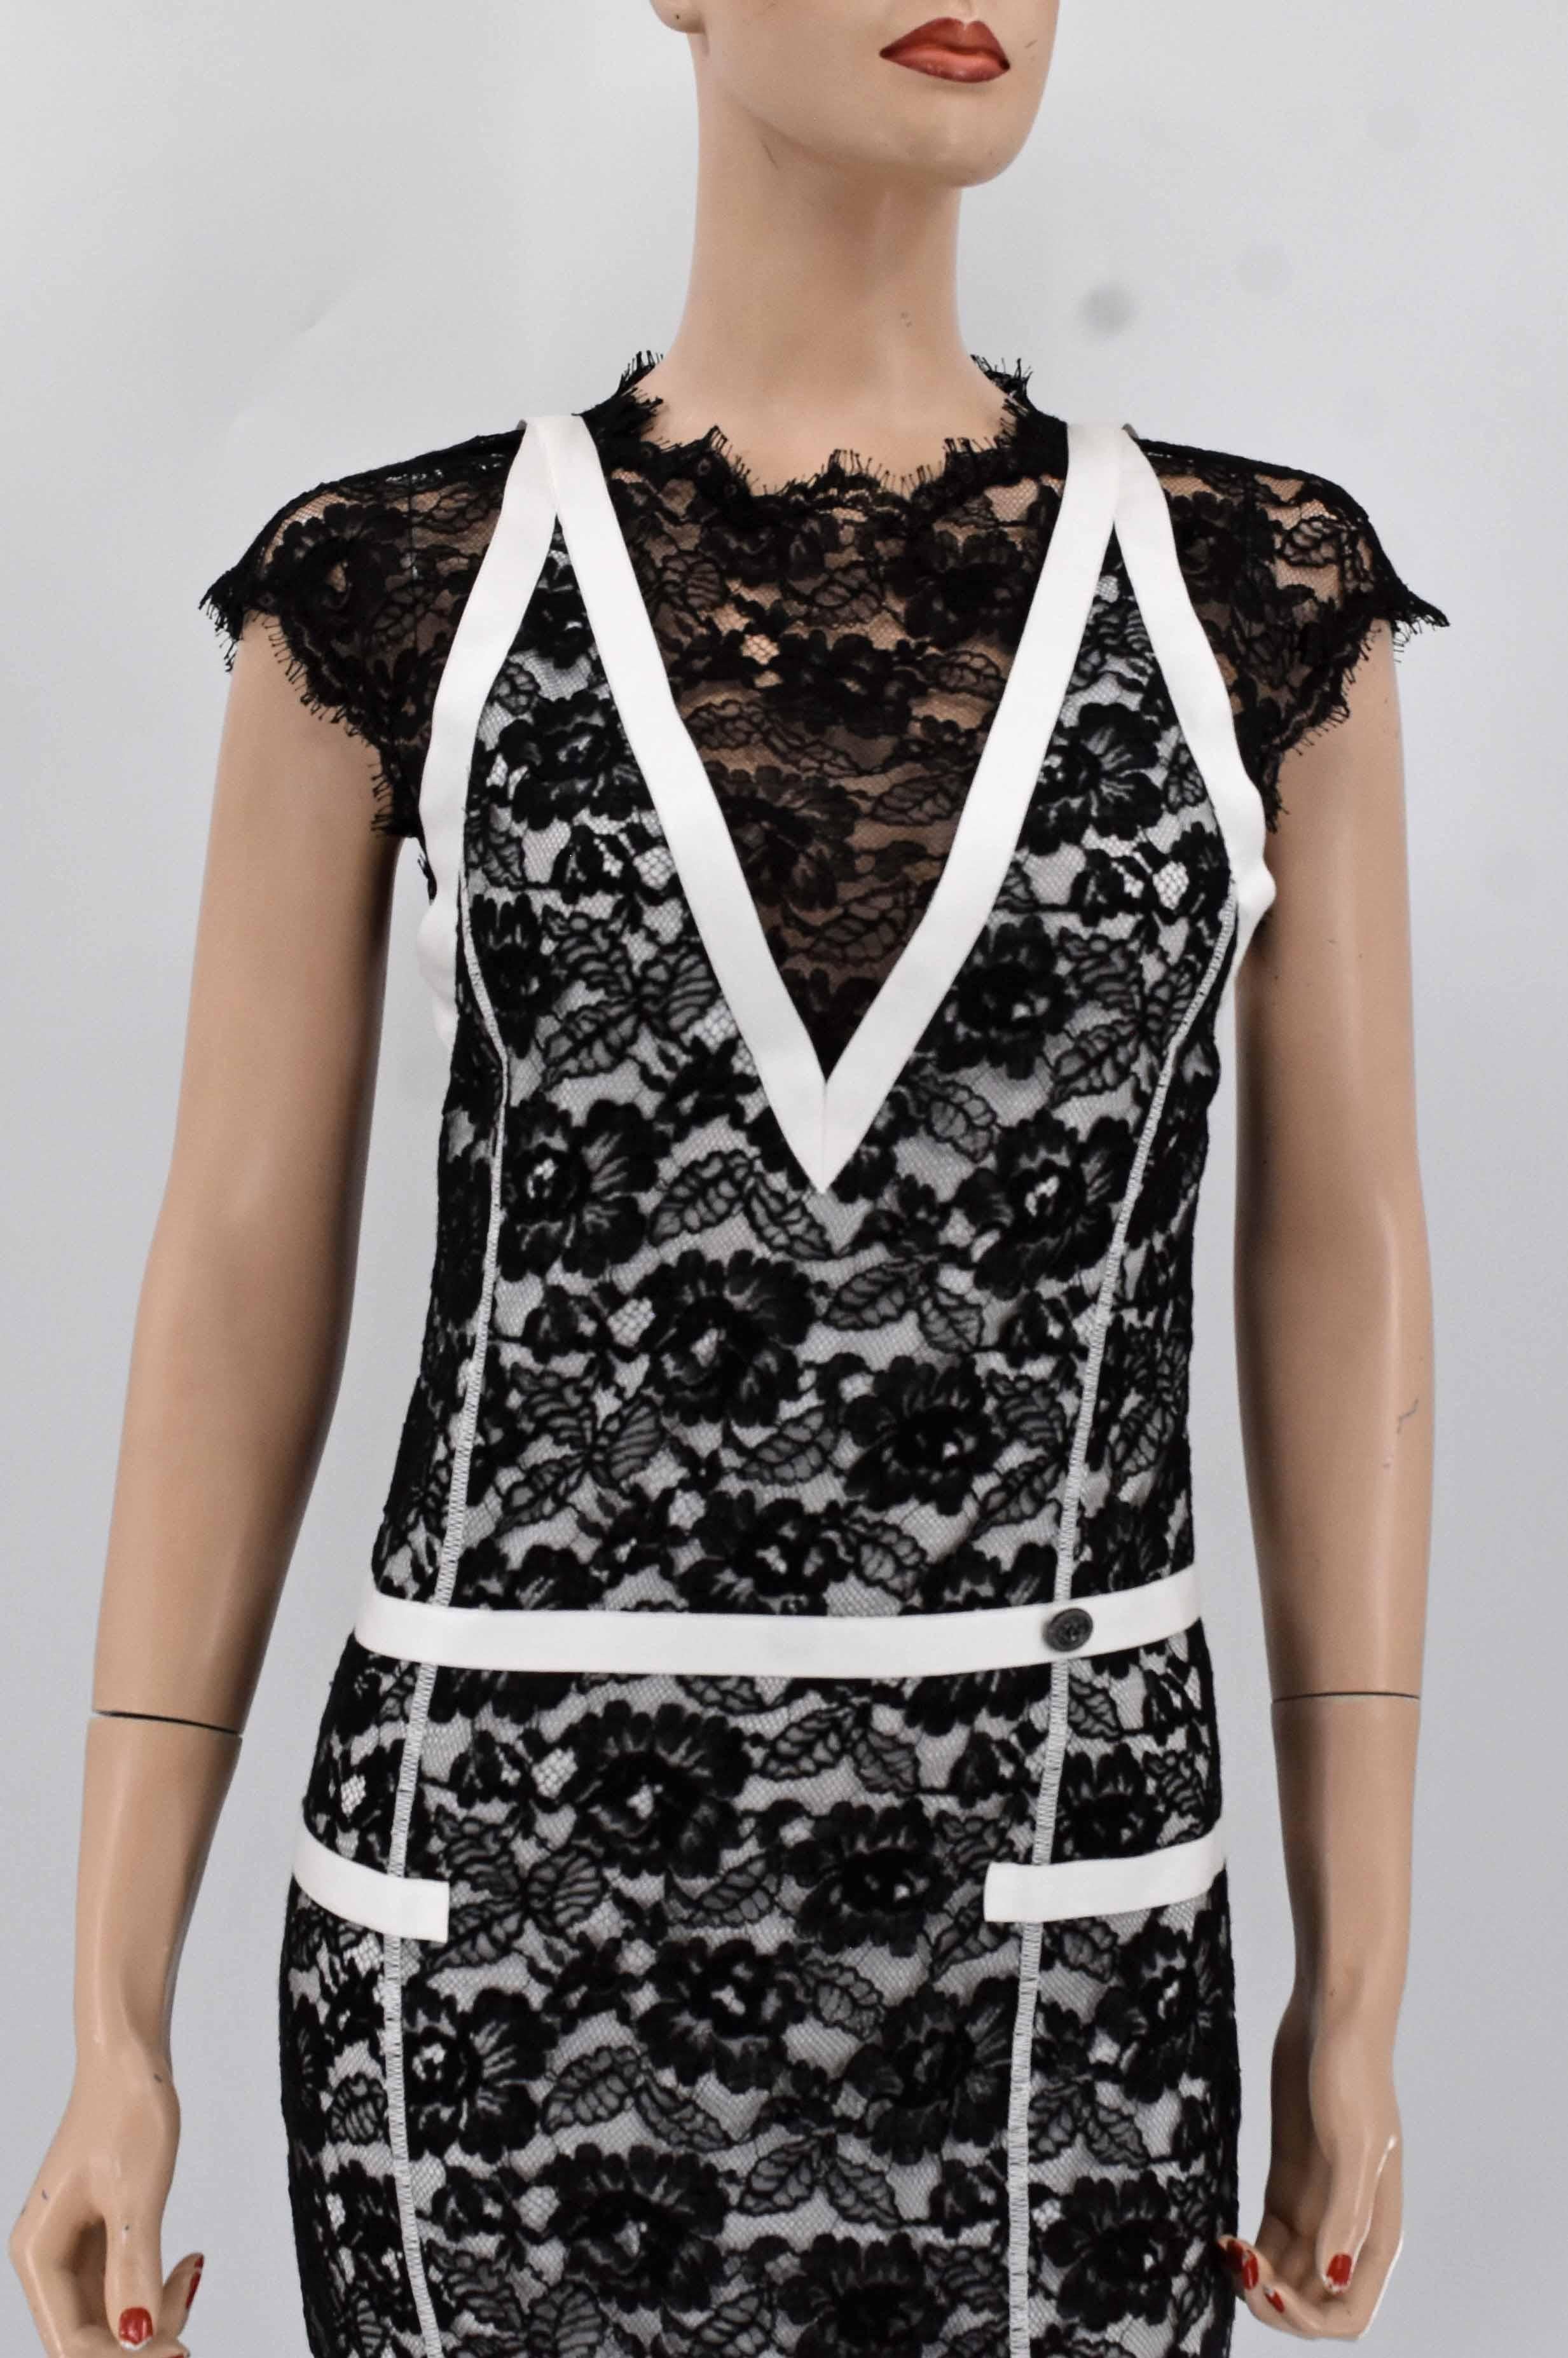 Chanel ribbon embellished runway maxi dress from Chanel Cruise 2014 runway collection. It is adorned with Chanel interlocking CC logo emblem. It is new with tag, retails $7,750. 